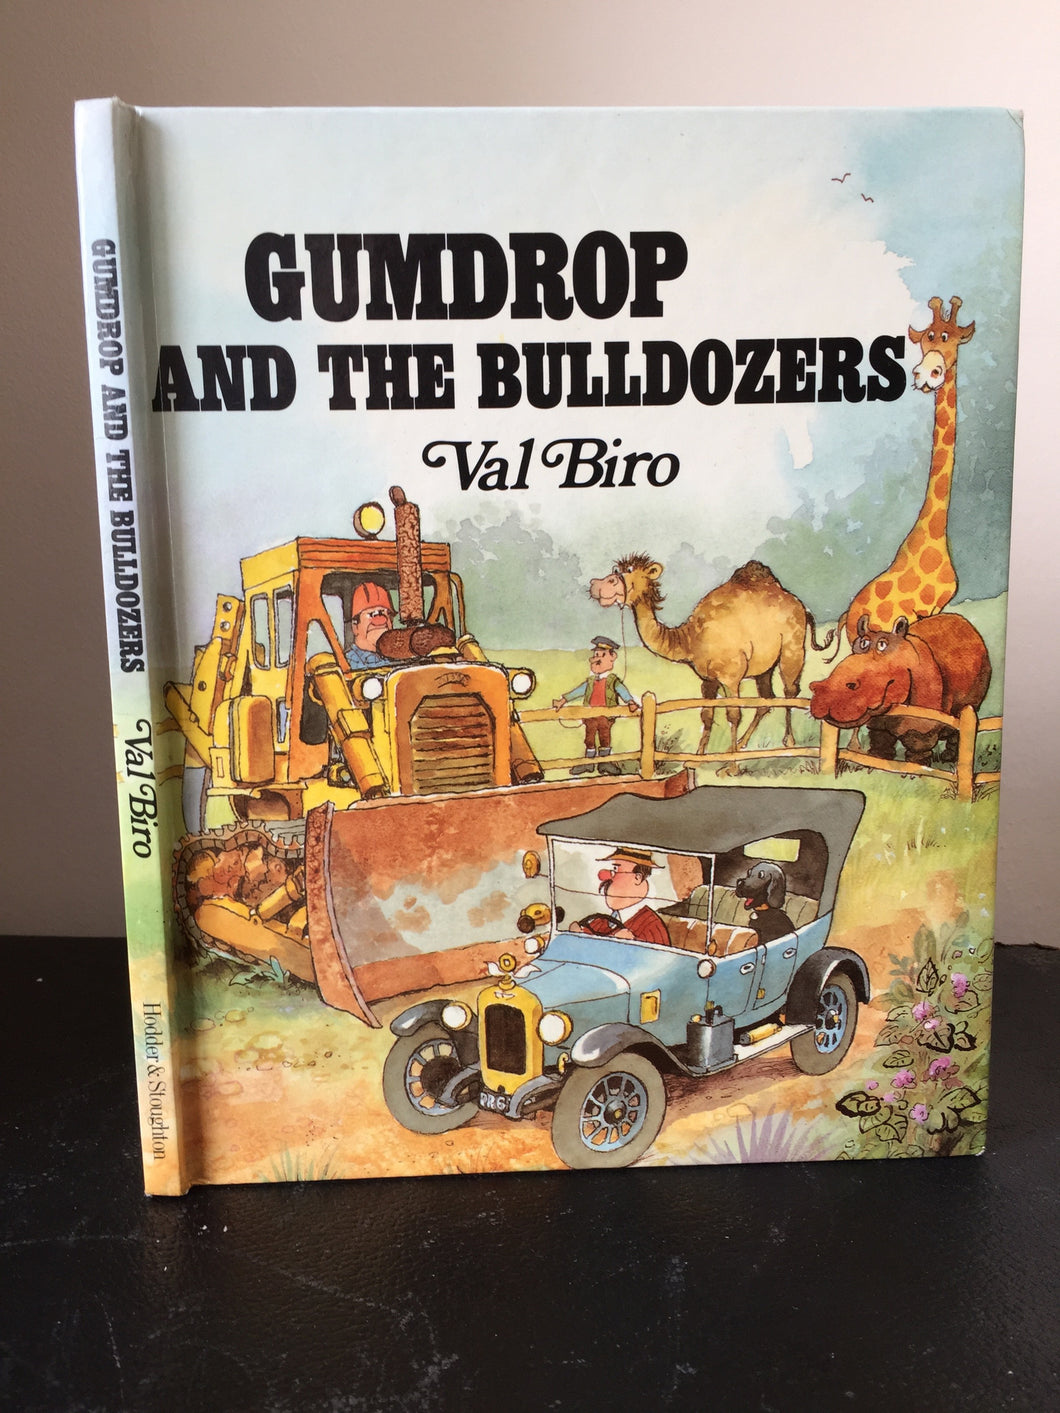 Gumdrop and the Bulldozers